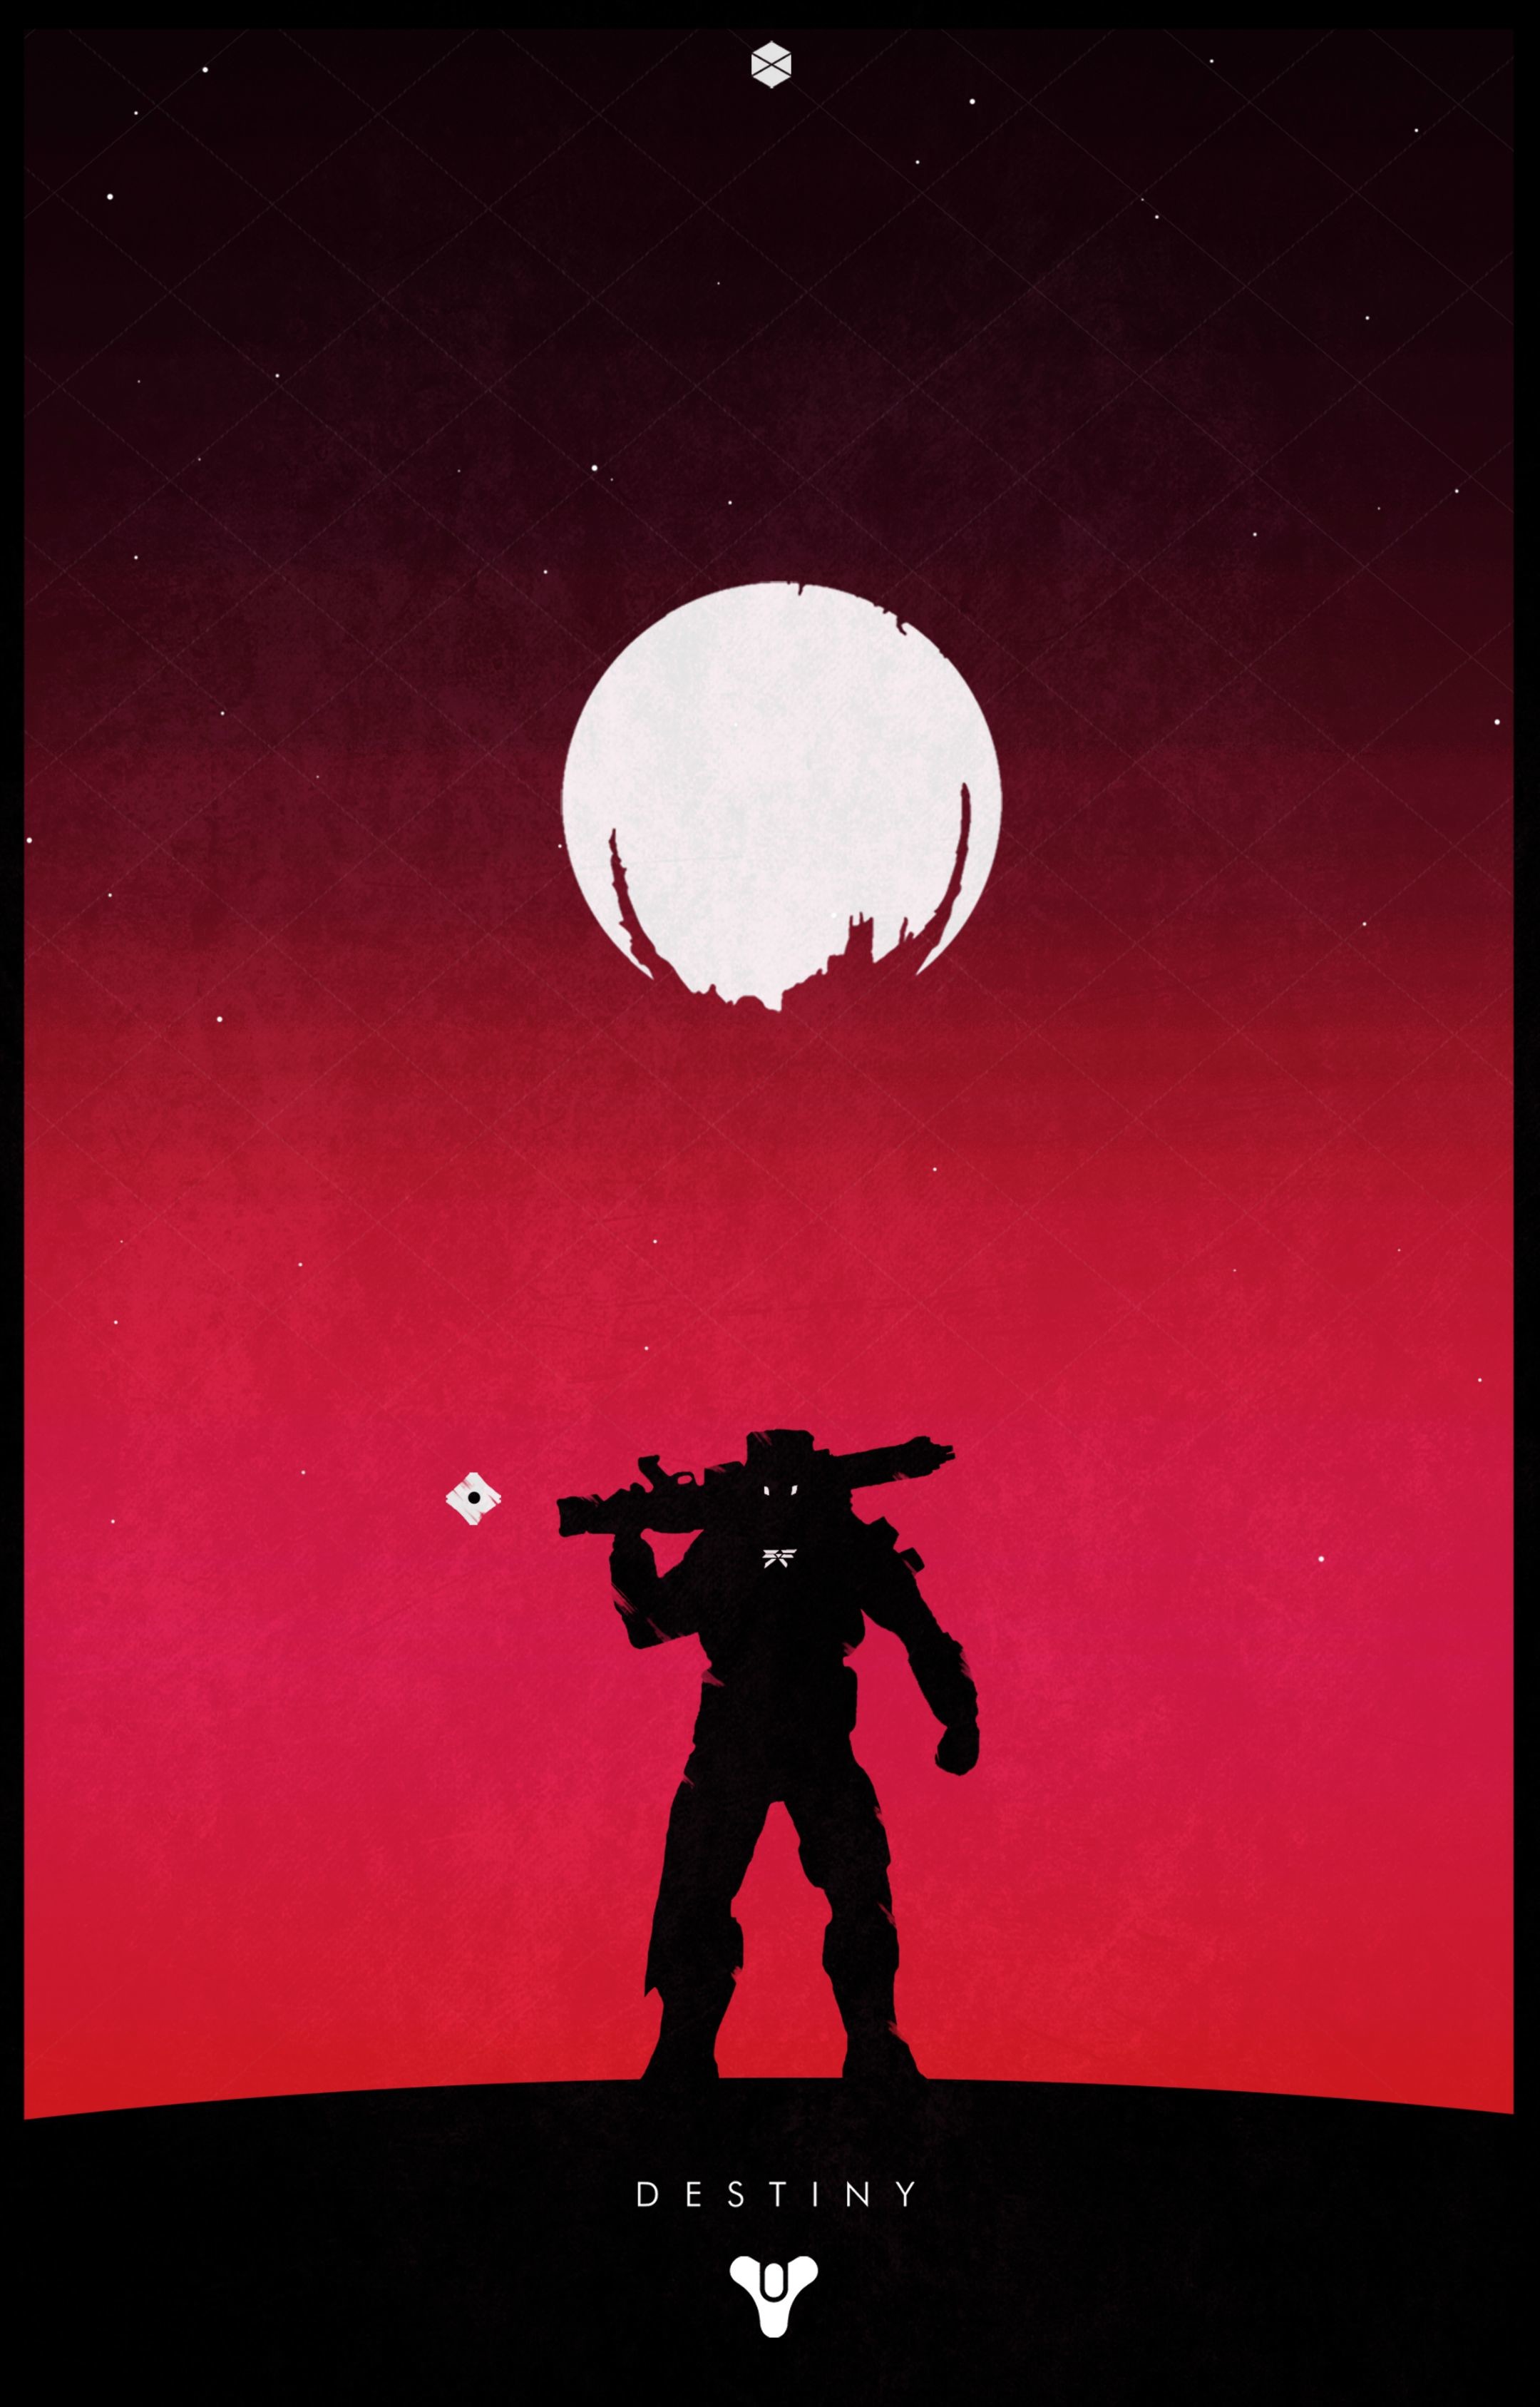 destiny iphone wallpaper,poster,fictional character,illustration,animation,fiction